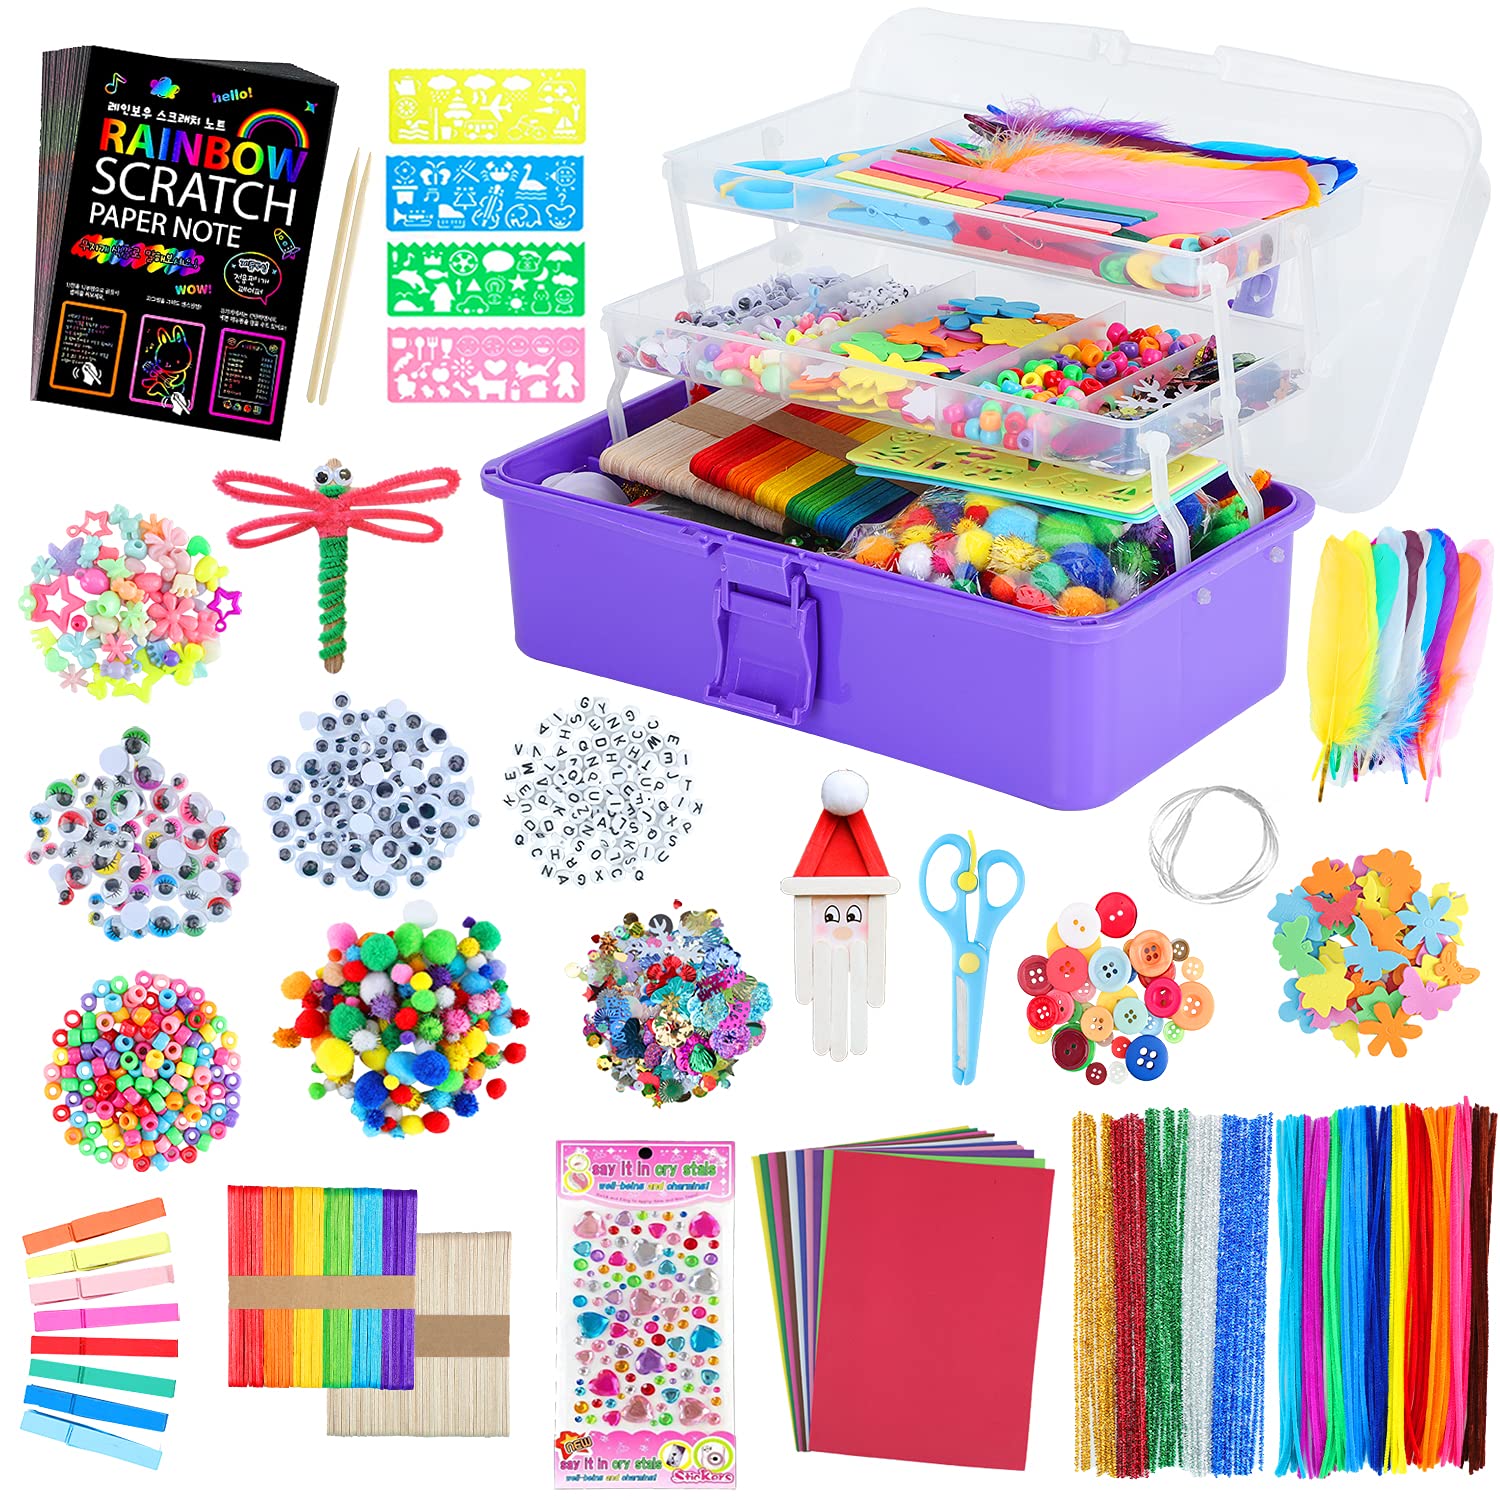 Arts and Crafts Supplies Set for Kids- 1600+ PCS DIY Craft Box for Kids, Include Scratch Paper Art Set, Craft Box Gift for Toddlers Age 4 5 6 7 8 9, Homeschool, Preschool(Purple)